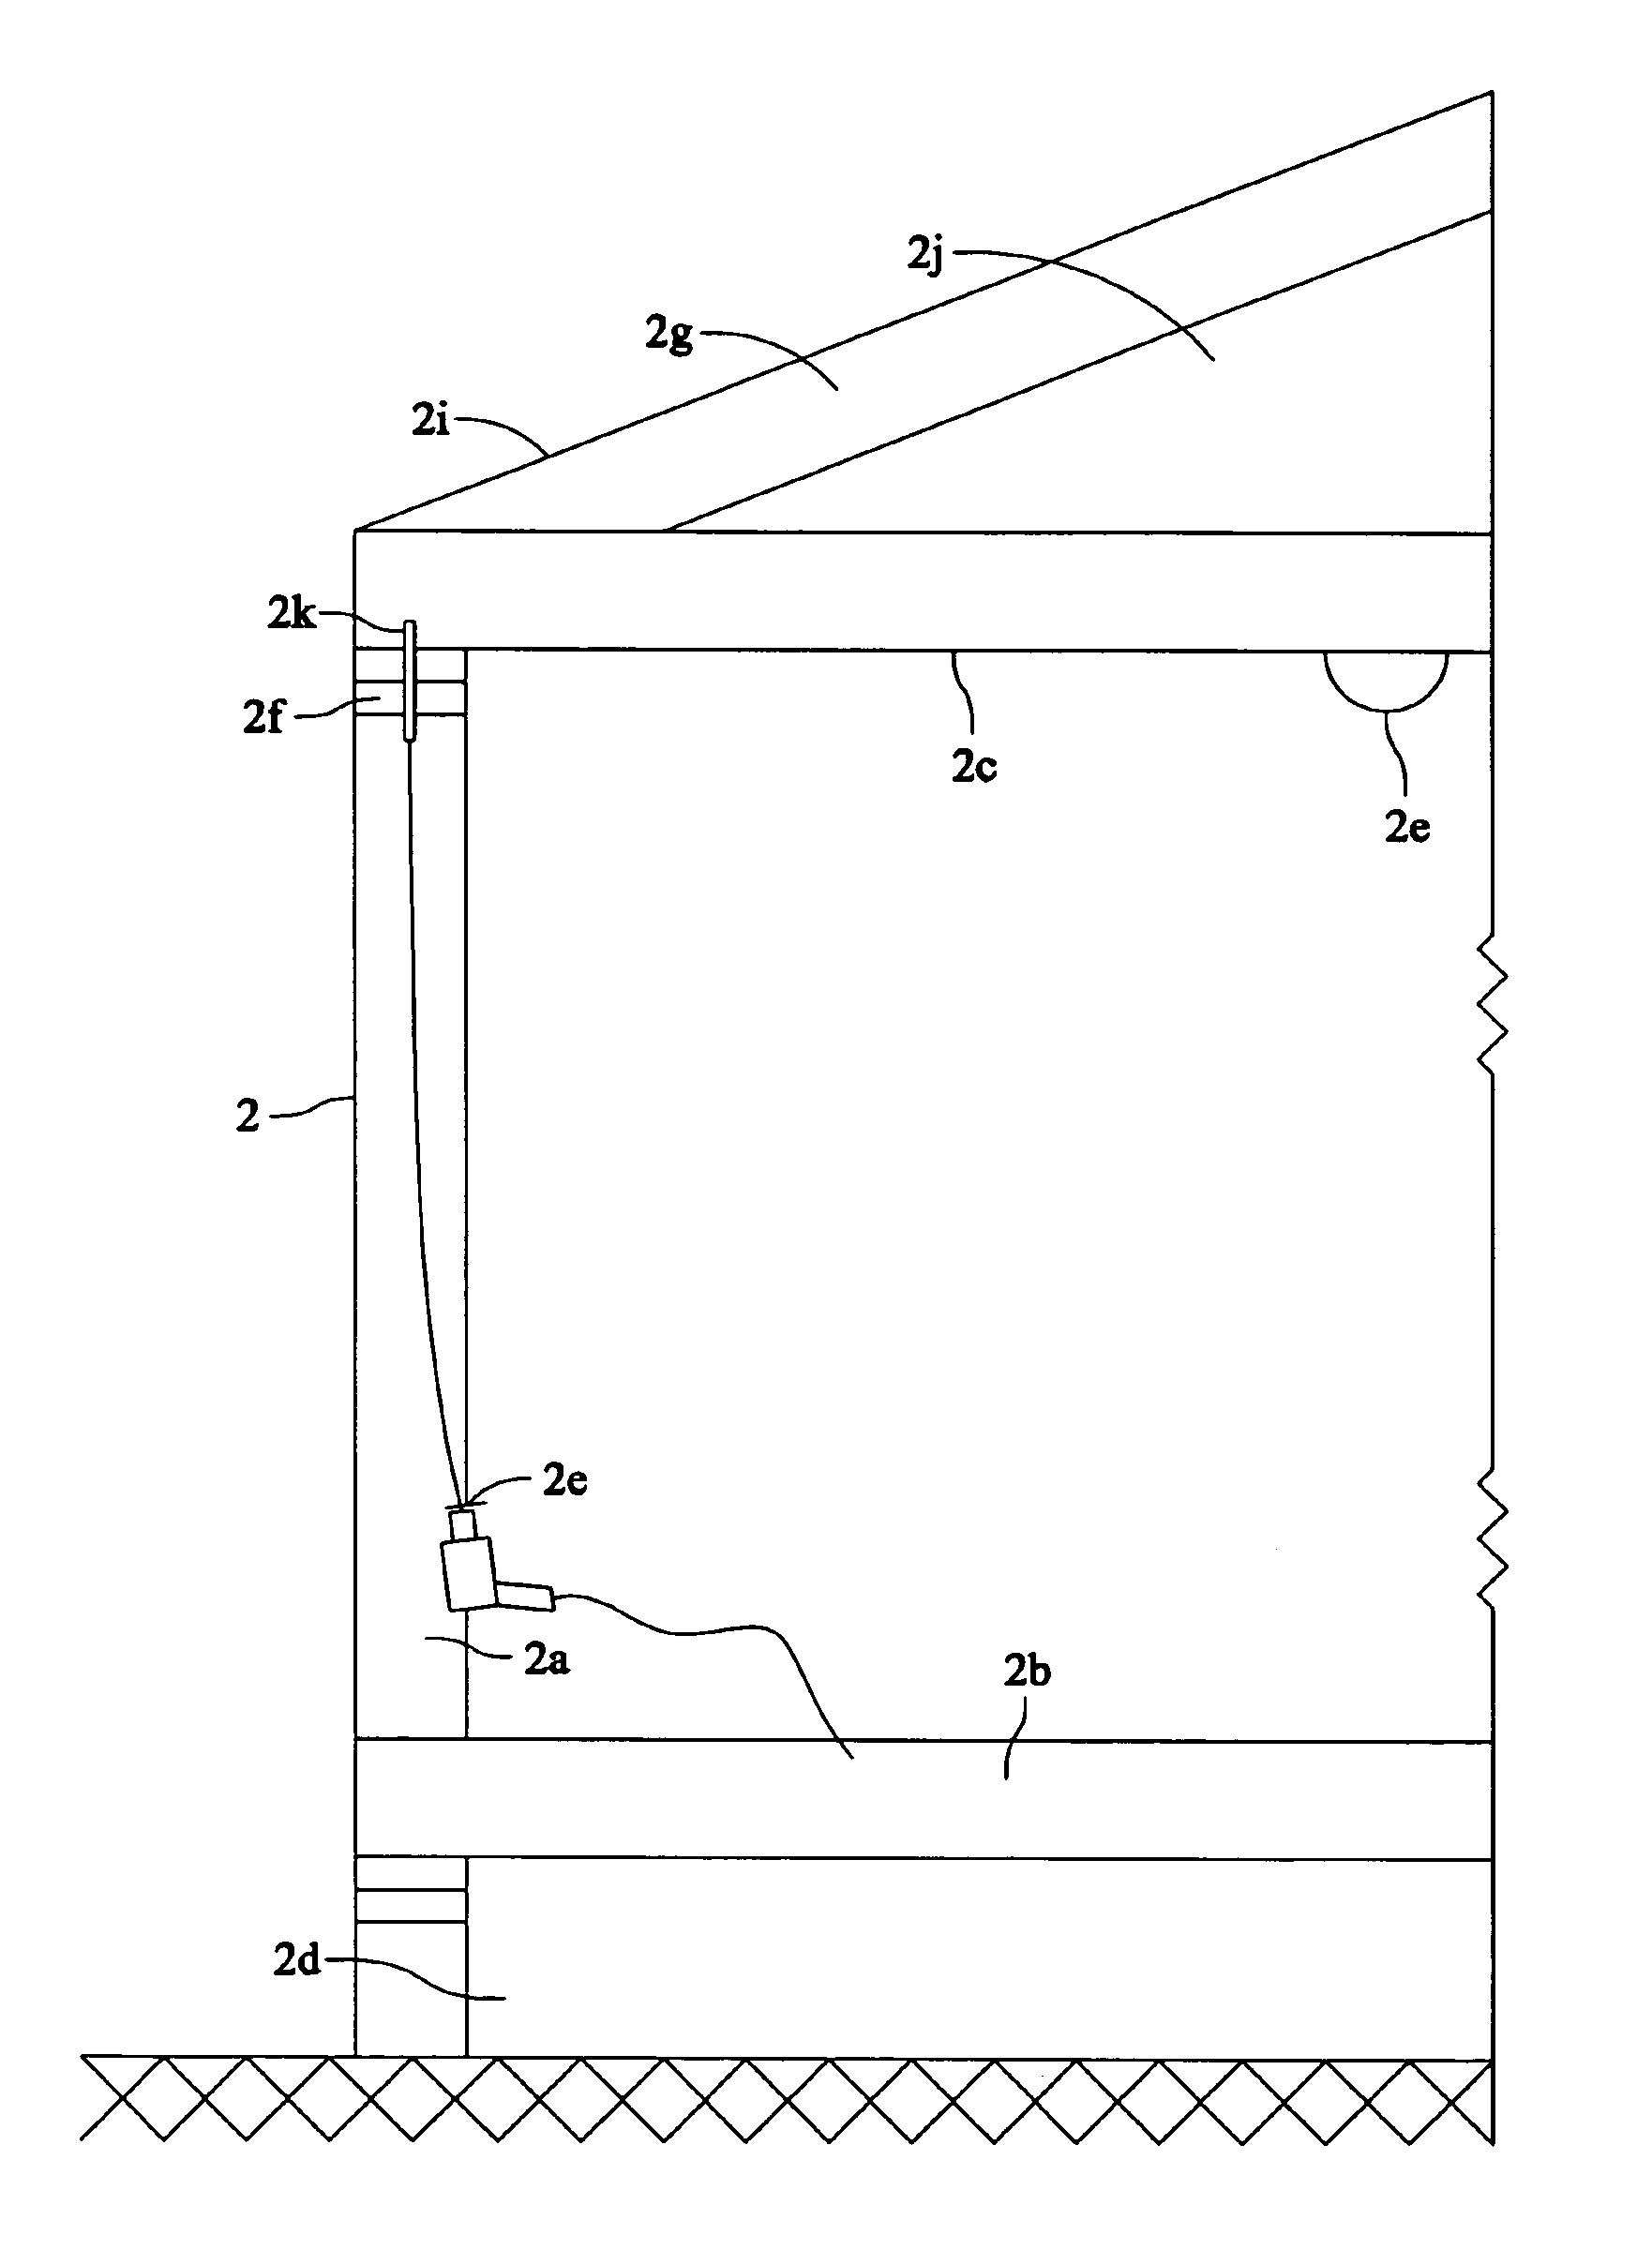 Magnetic wire pulling system